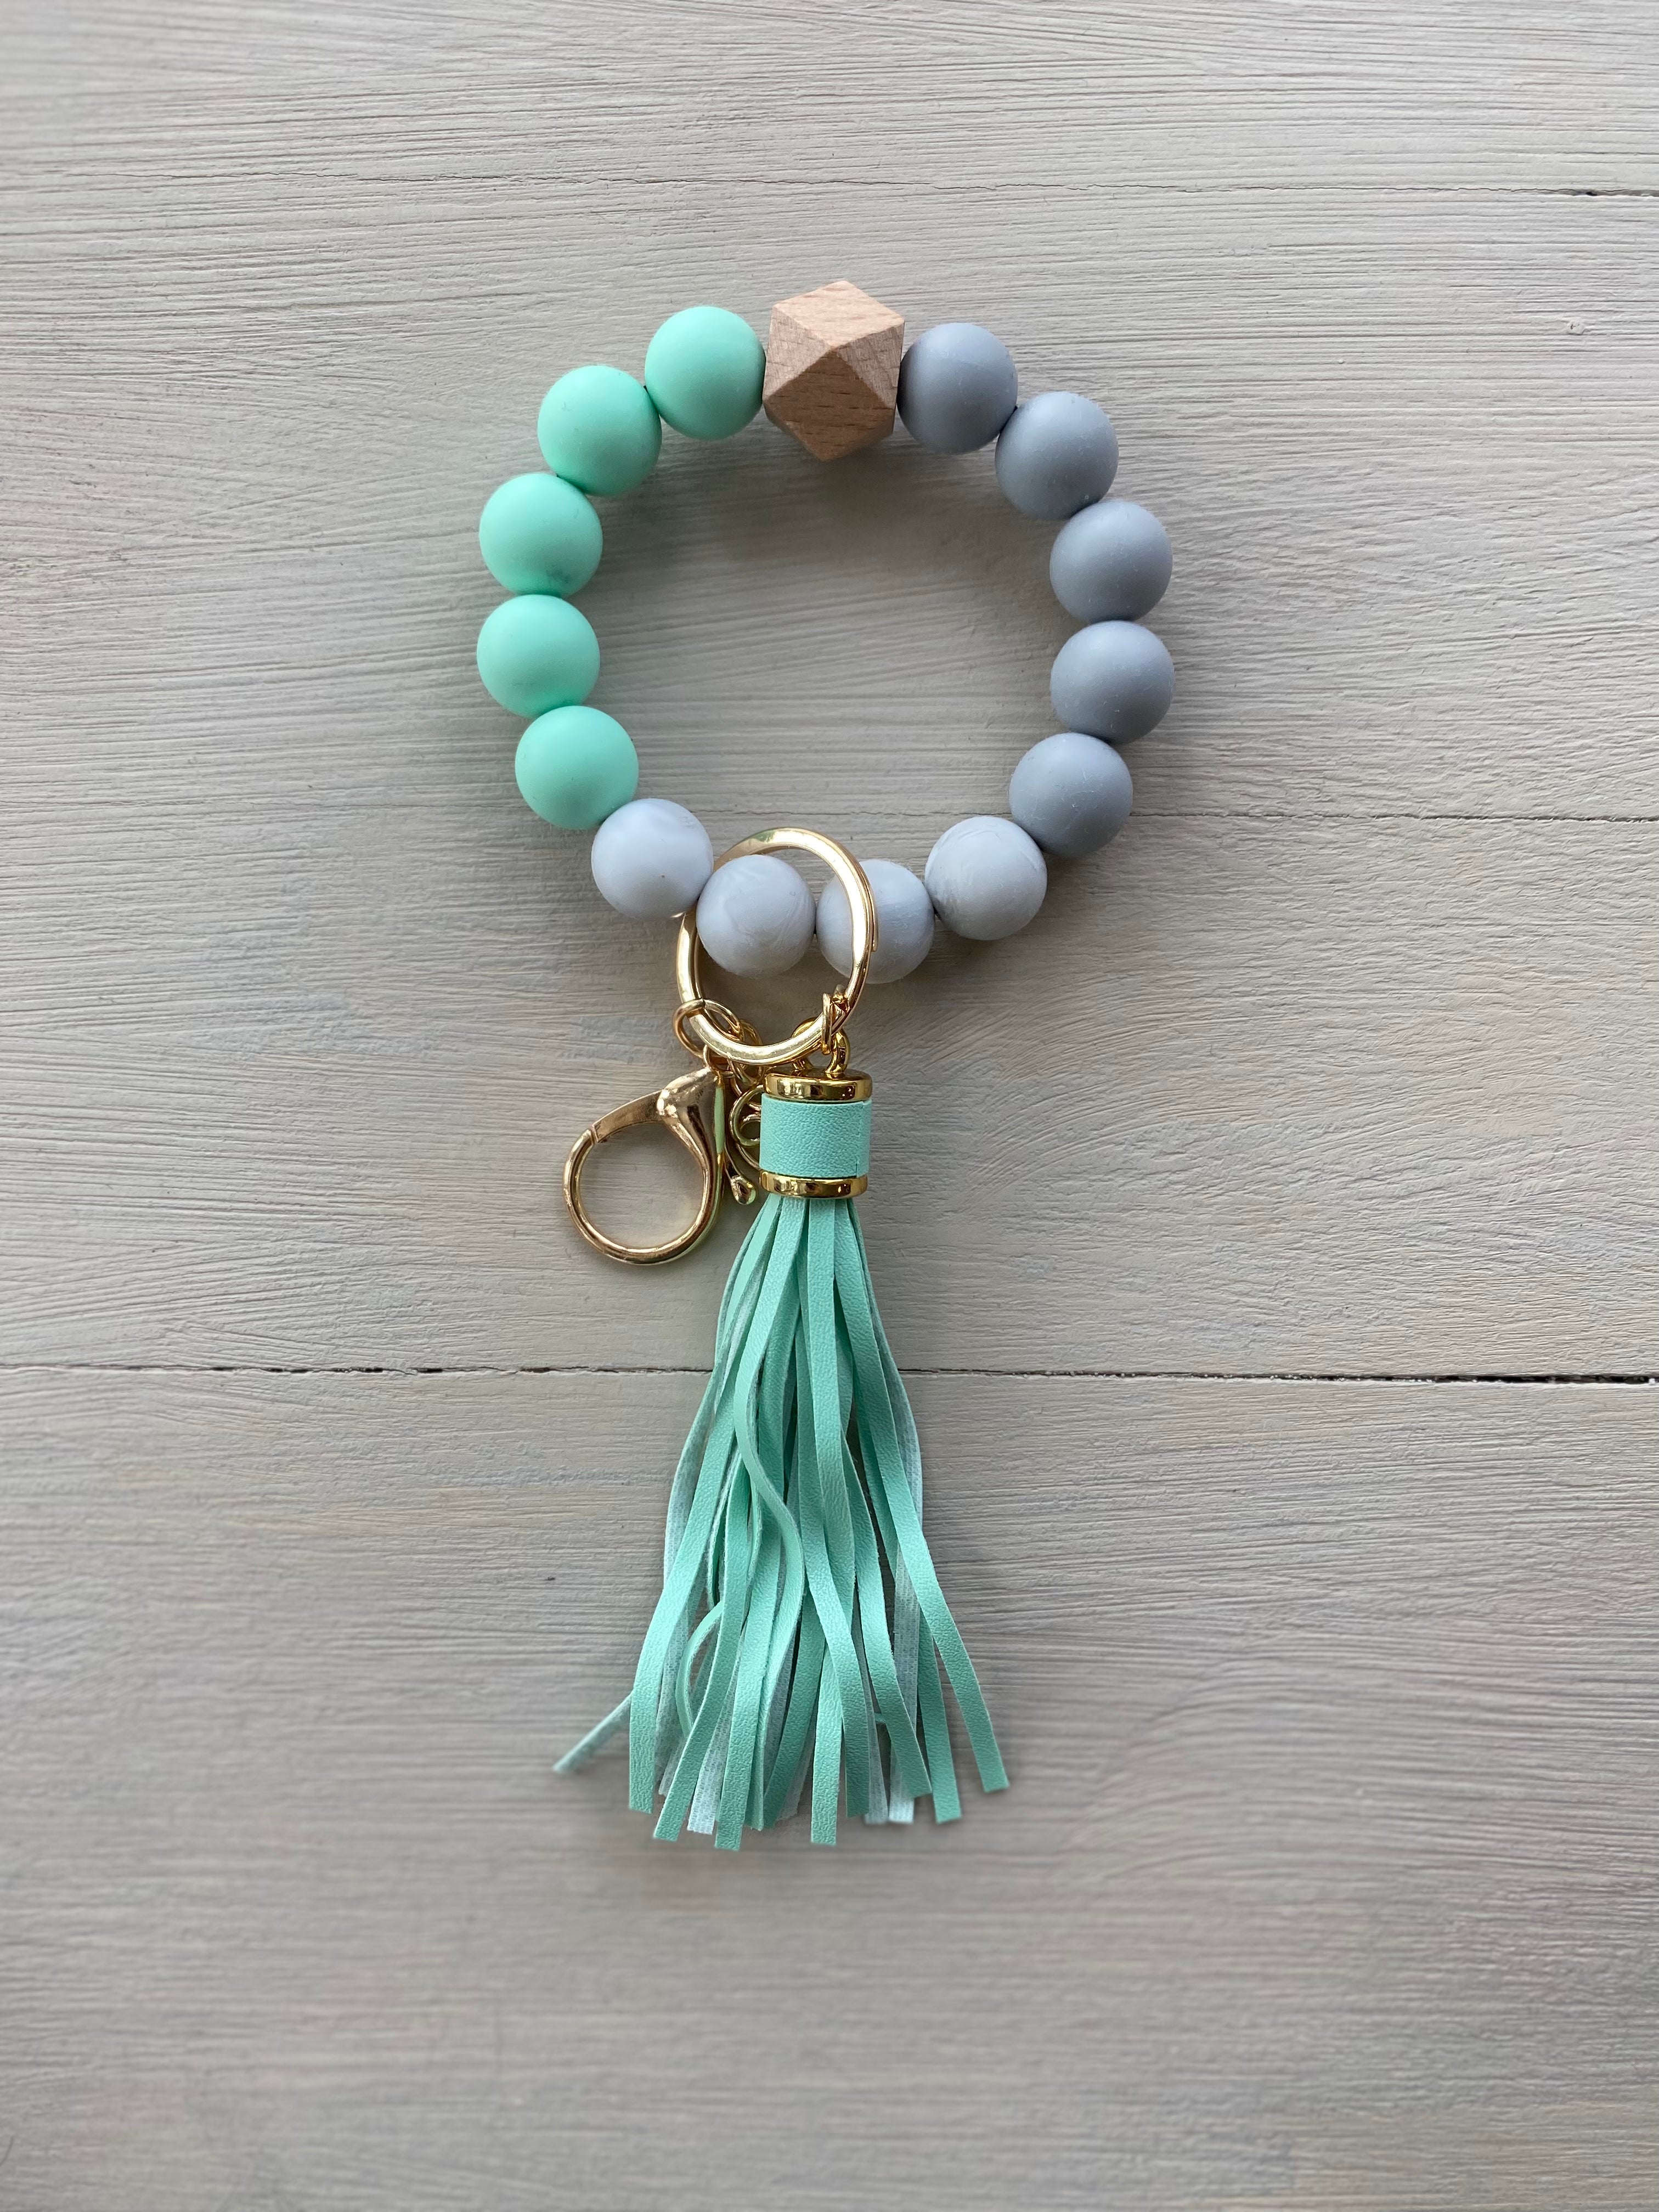 SVF Soft Mint and Grey Marble Silicone Wristlet Beaded Key Chain Bracelet with Tassel and Charm of choice! The Mustard Seed Collection, The Seed